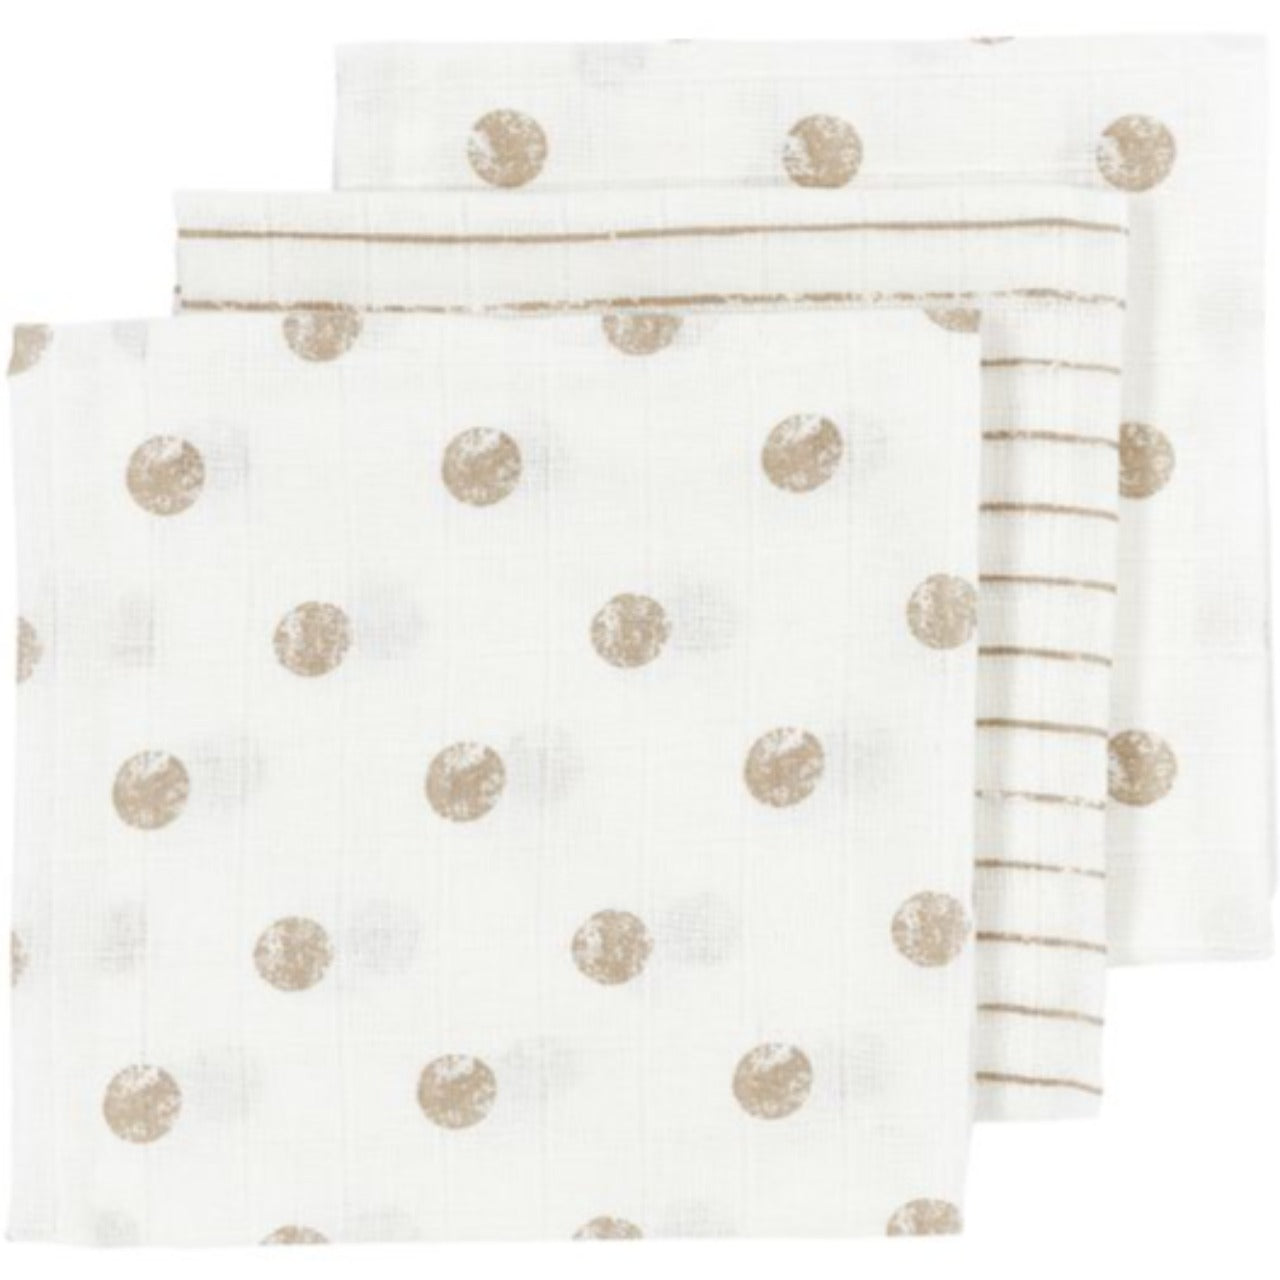 Hydrophilic nappies 3-pack (various designs)